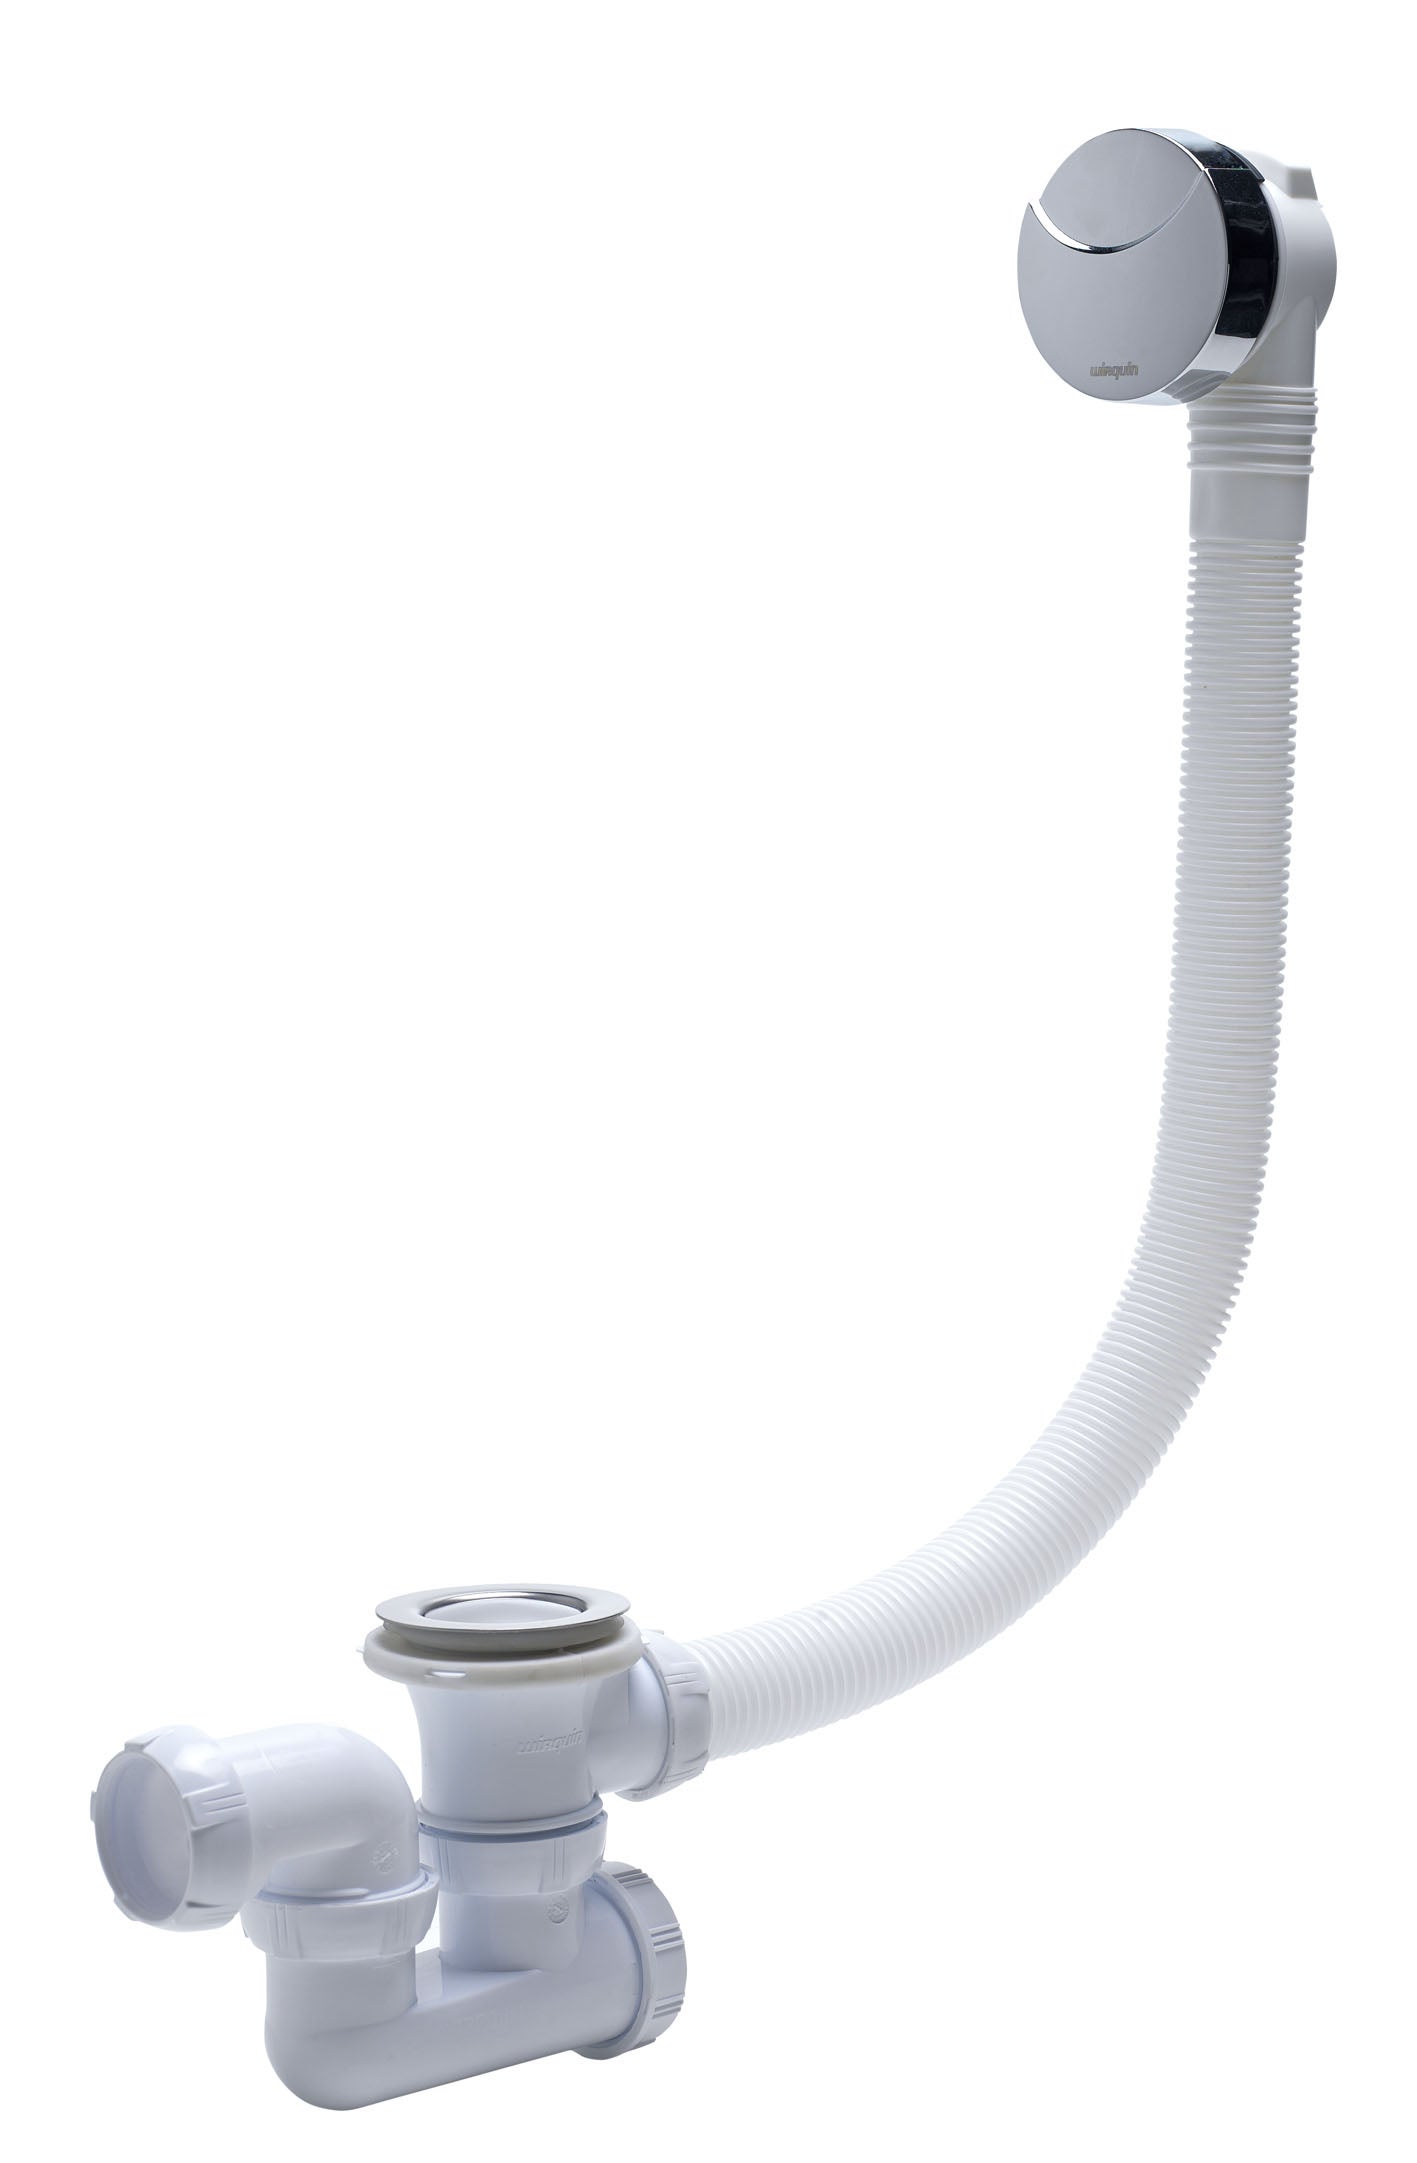 vidage baignoire a cable l 700 mm siphon orientable wirquin leroy merlin